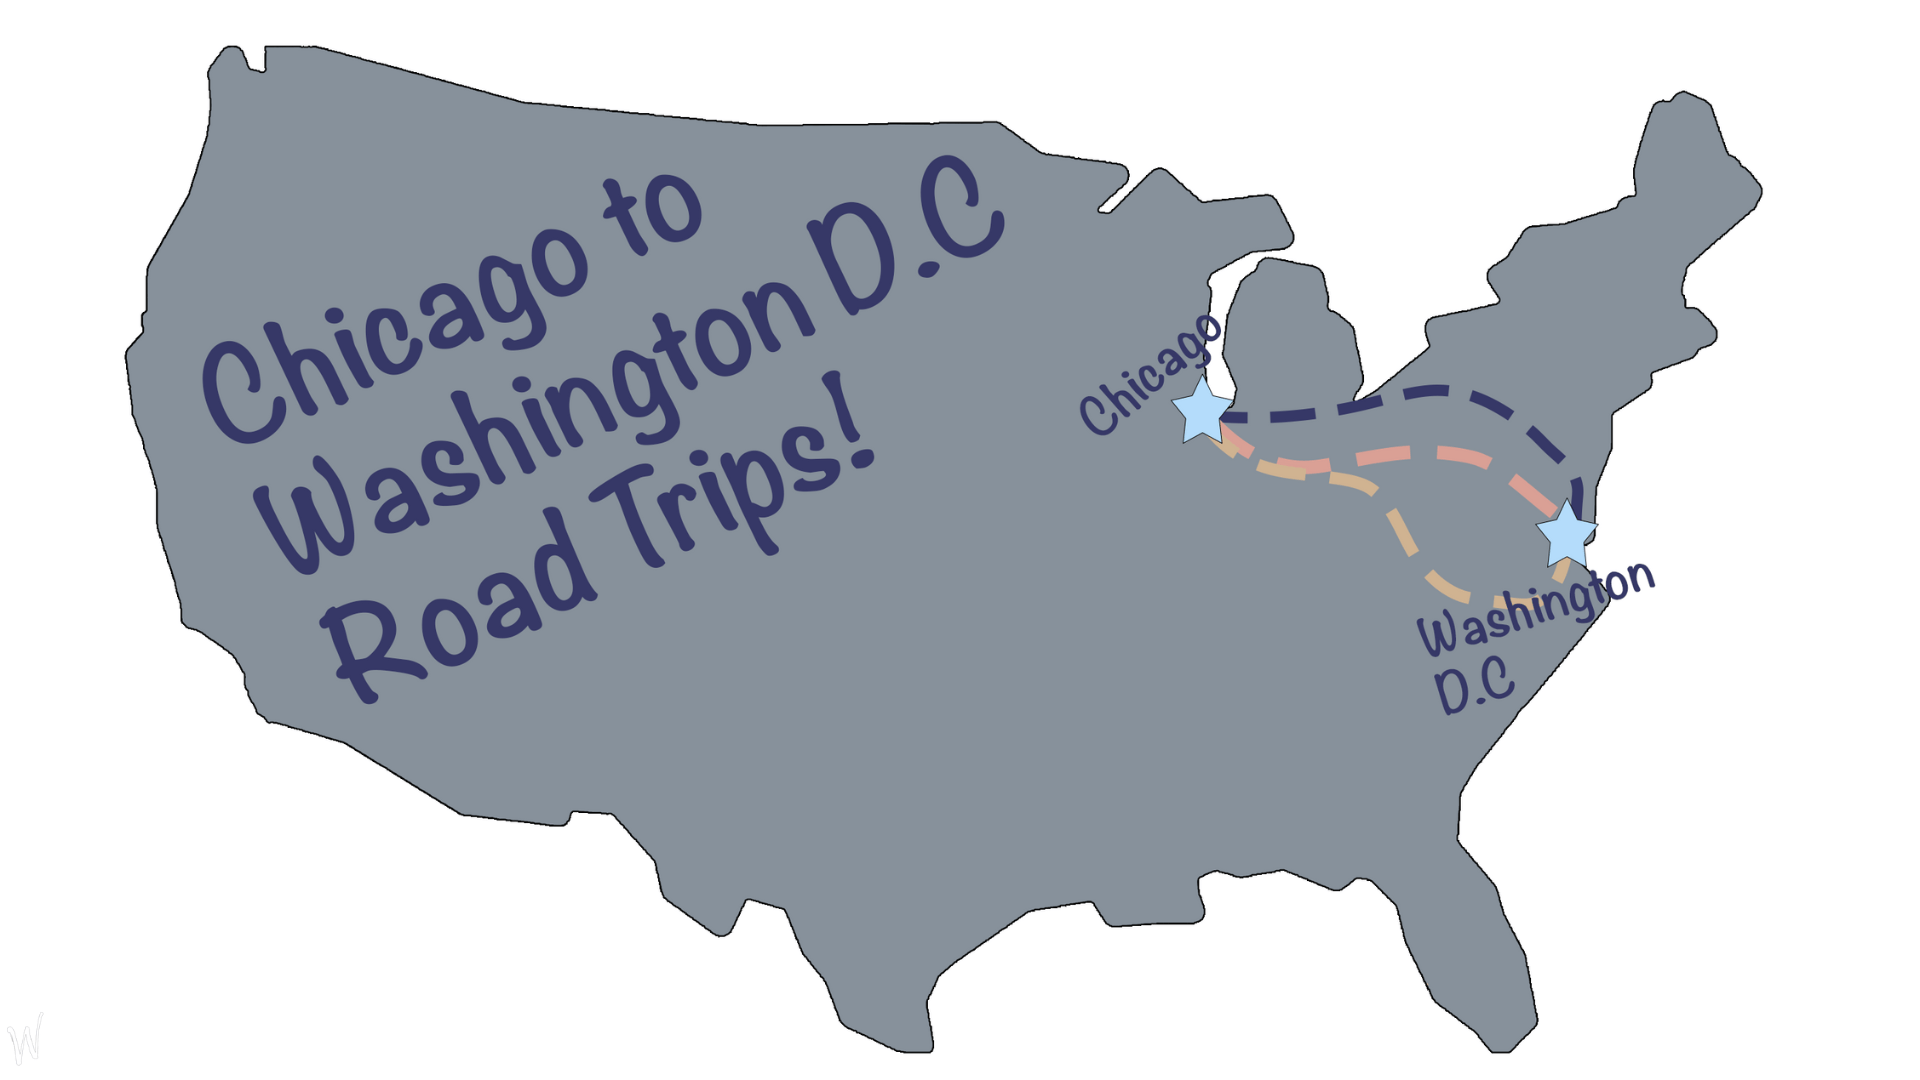 A map of the US with Chicago to DC Road Trip routes highlighted